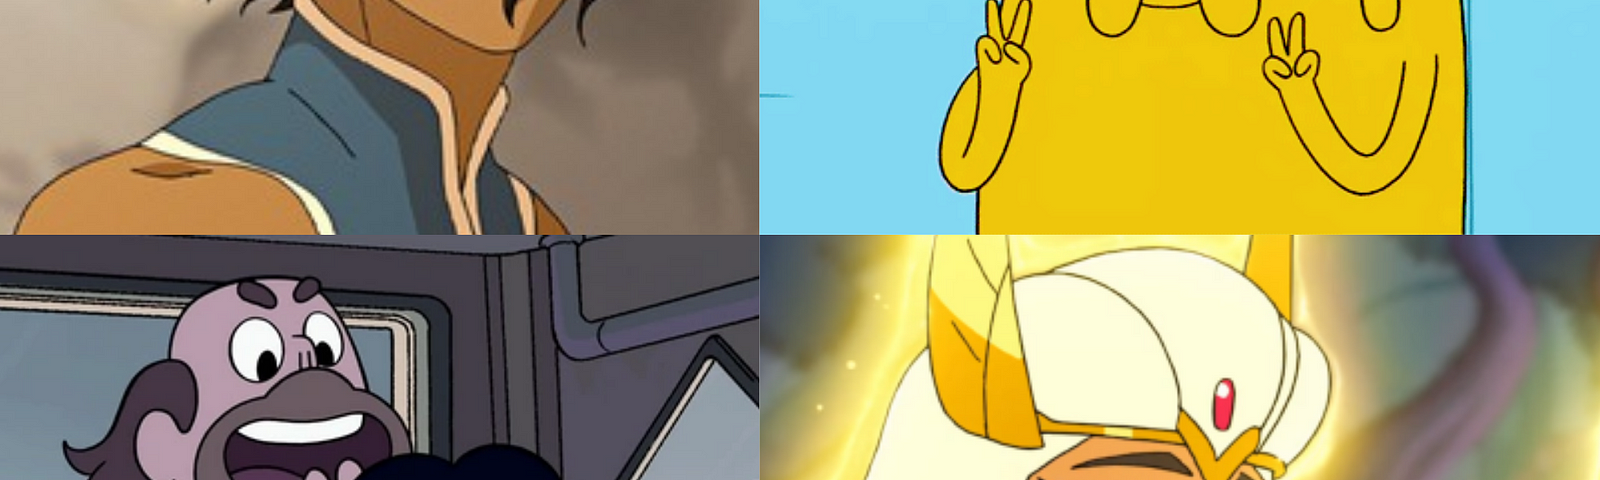 Collage of characters from different TV shows: Avatar Korra, Jake the Dog, Greg and Steven Universe, and Mara.